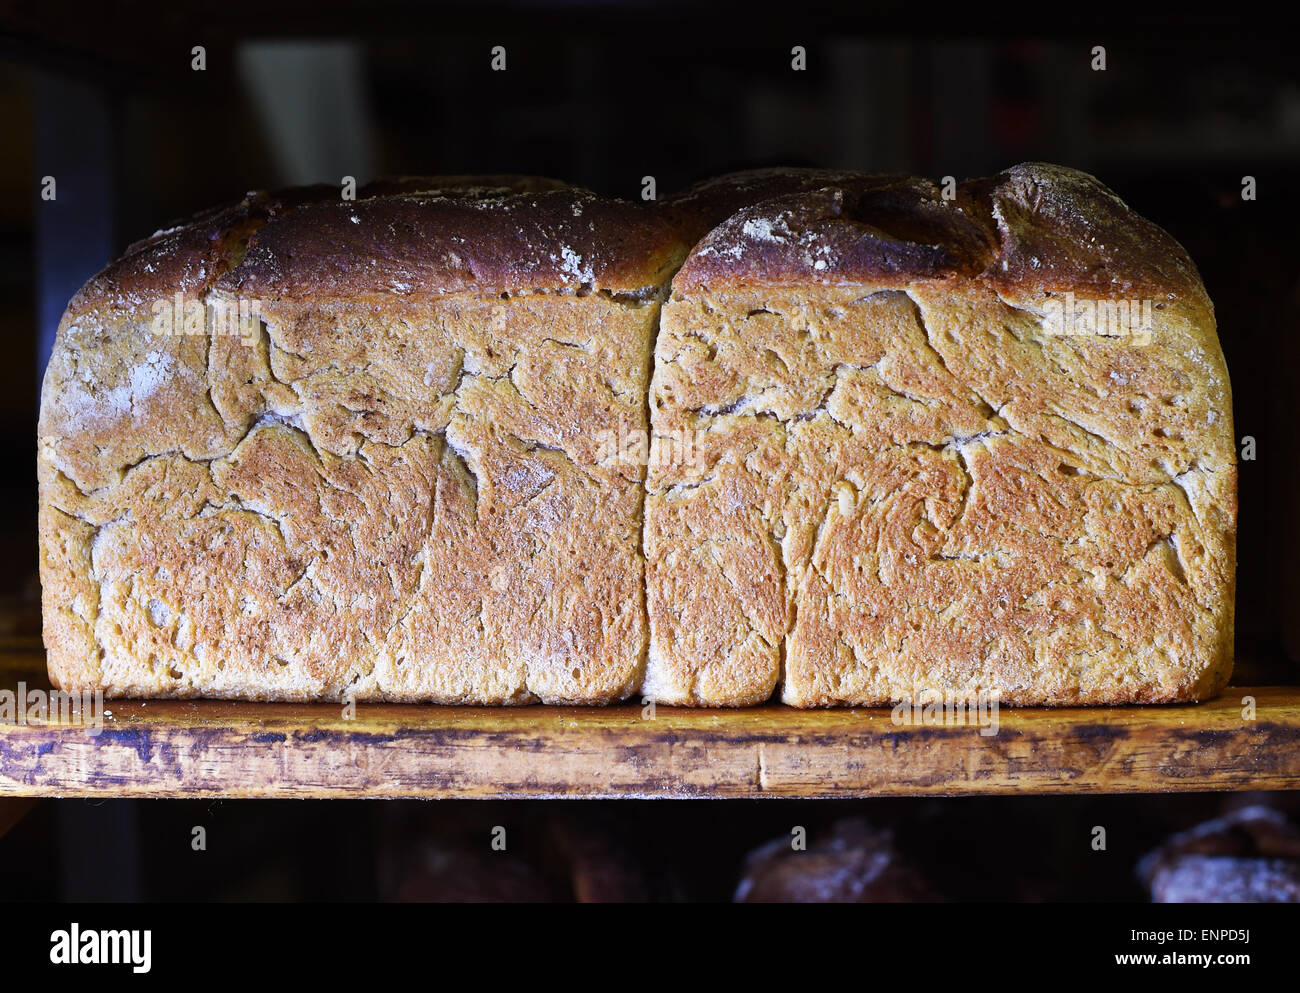 Berlin, Germany. 07th May, 2015. A loaf of whole-grain bread has been placed on wooden boards at Beumer & Lutum Baeckerei GmbH (Beumer & Lutum Bakery) in Berlin, Germany, 07 May 2015. 3000 to 5000 loaves of bread are produced every day without using bread improvers and premixtures and sold in 5 branches or organic food stores. The company has also joined the 'Week of open bakeries', an event initiated by organic bakeries in Berlin. Photo: Jens Kalaene/dpa/Alamy Live News Stock Photo